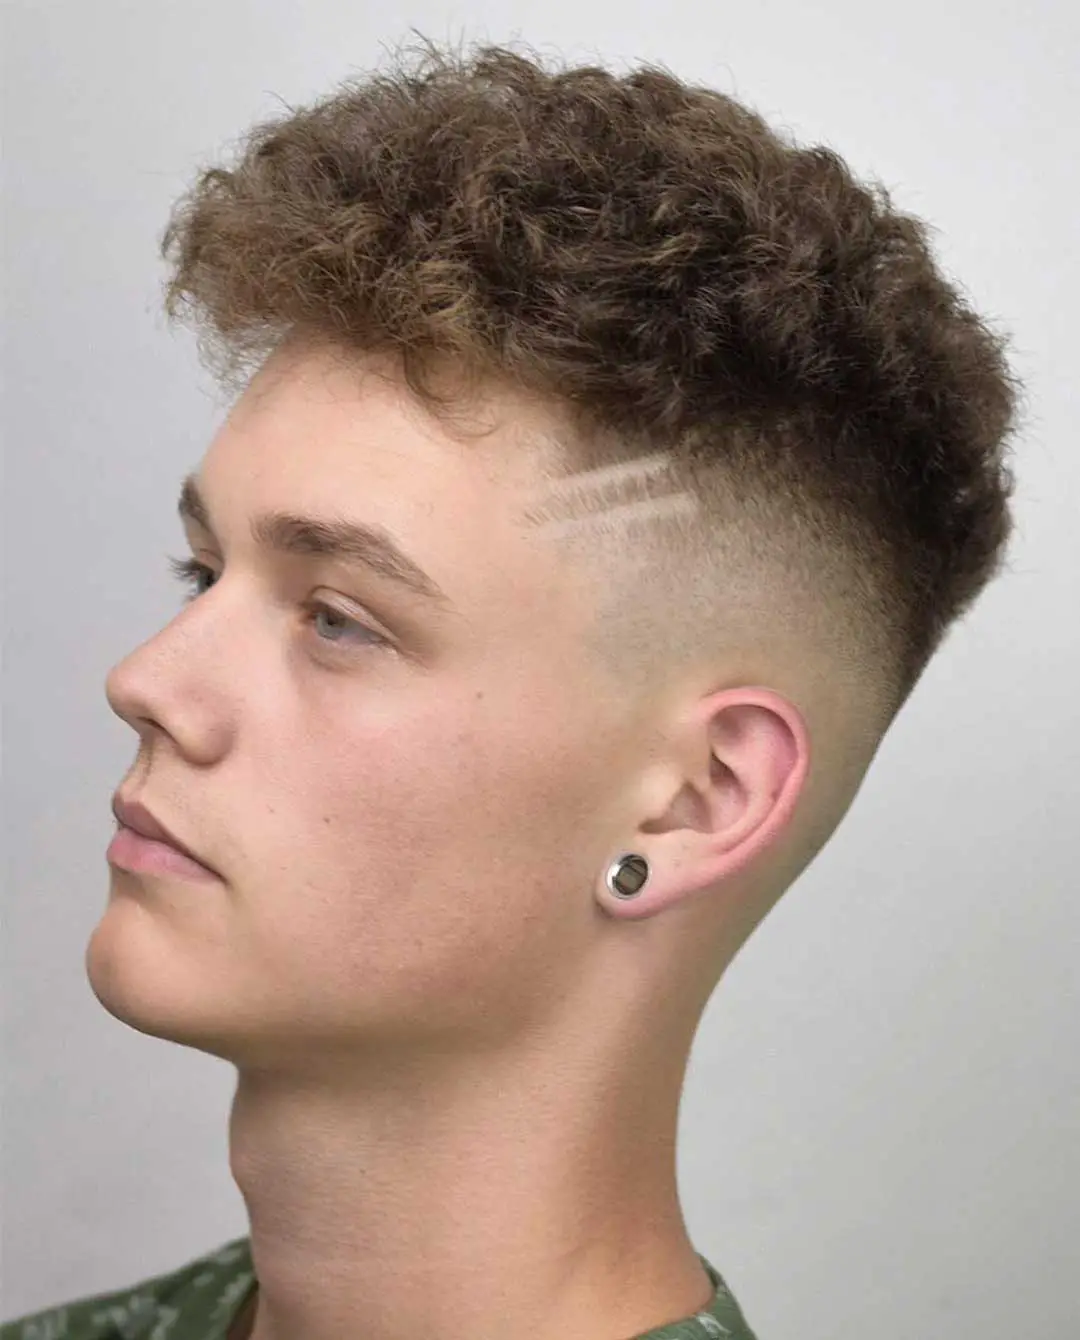 FuckBoy Haircut: What Is & How To Style F Boy Haircut